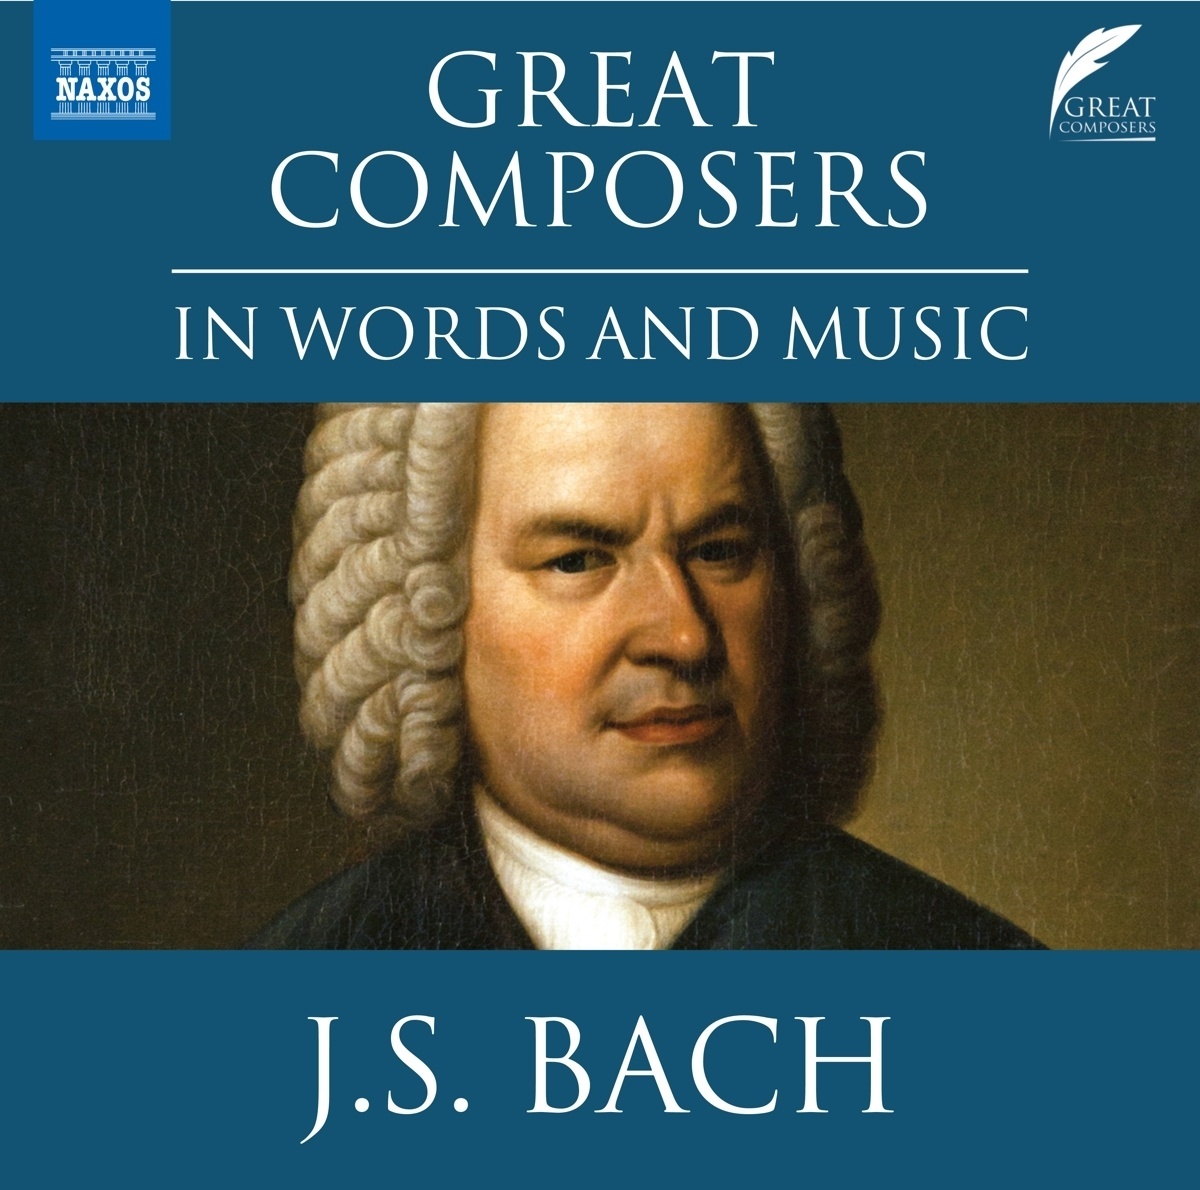 Great Composers-Bach - Leighton Pugh (Hörbuch)